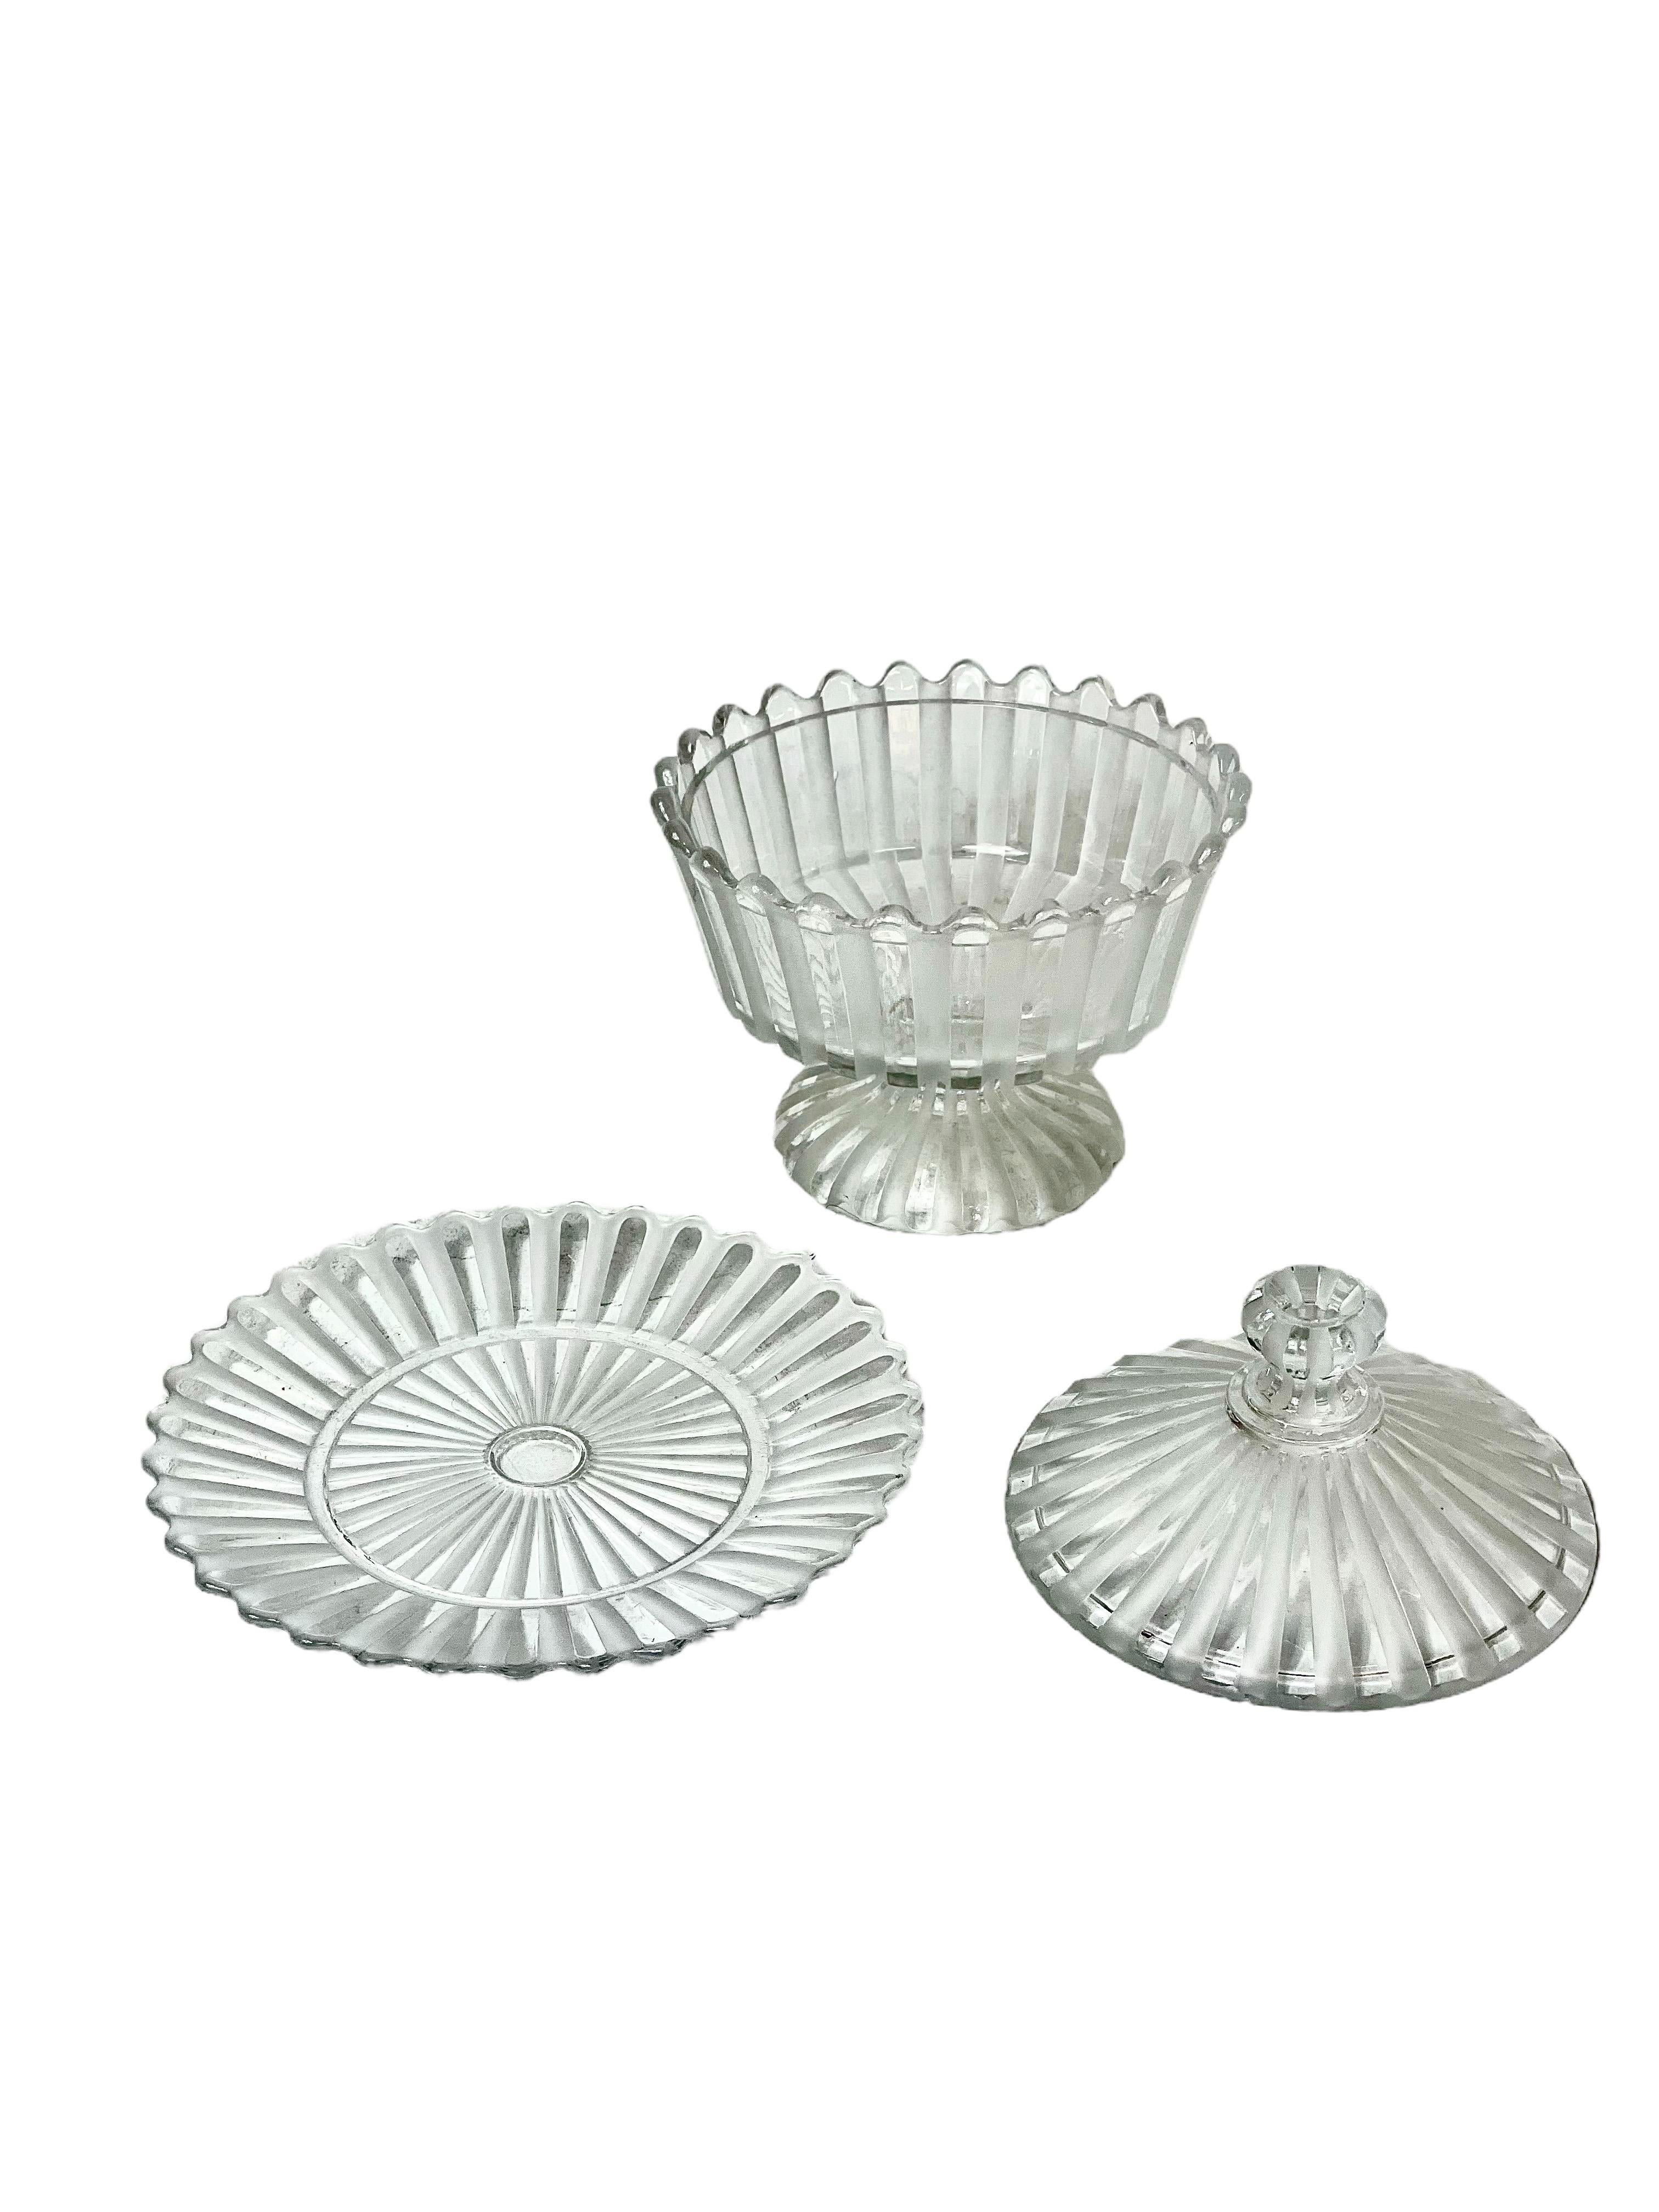 A sparkling pair of Antique Baccarat crystal 'bonbonnières', or lidded candy dishes, with matching plates. Each dish features an undulating scalloped edge, and alternating ribbed flutes of polished and frosted glass, rising on a pedestal stem from a